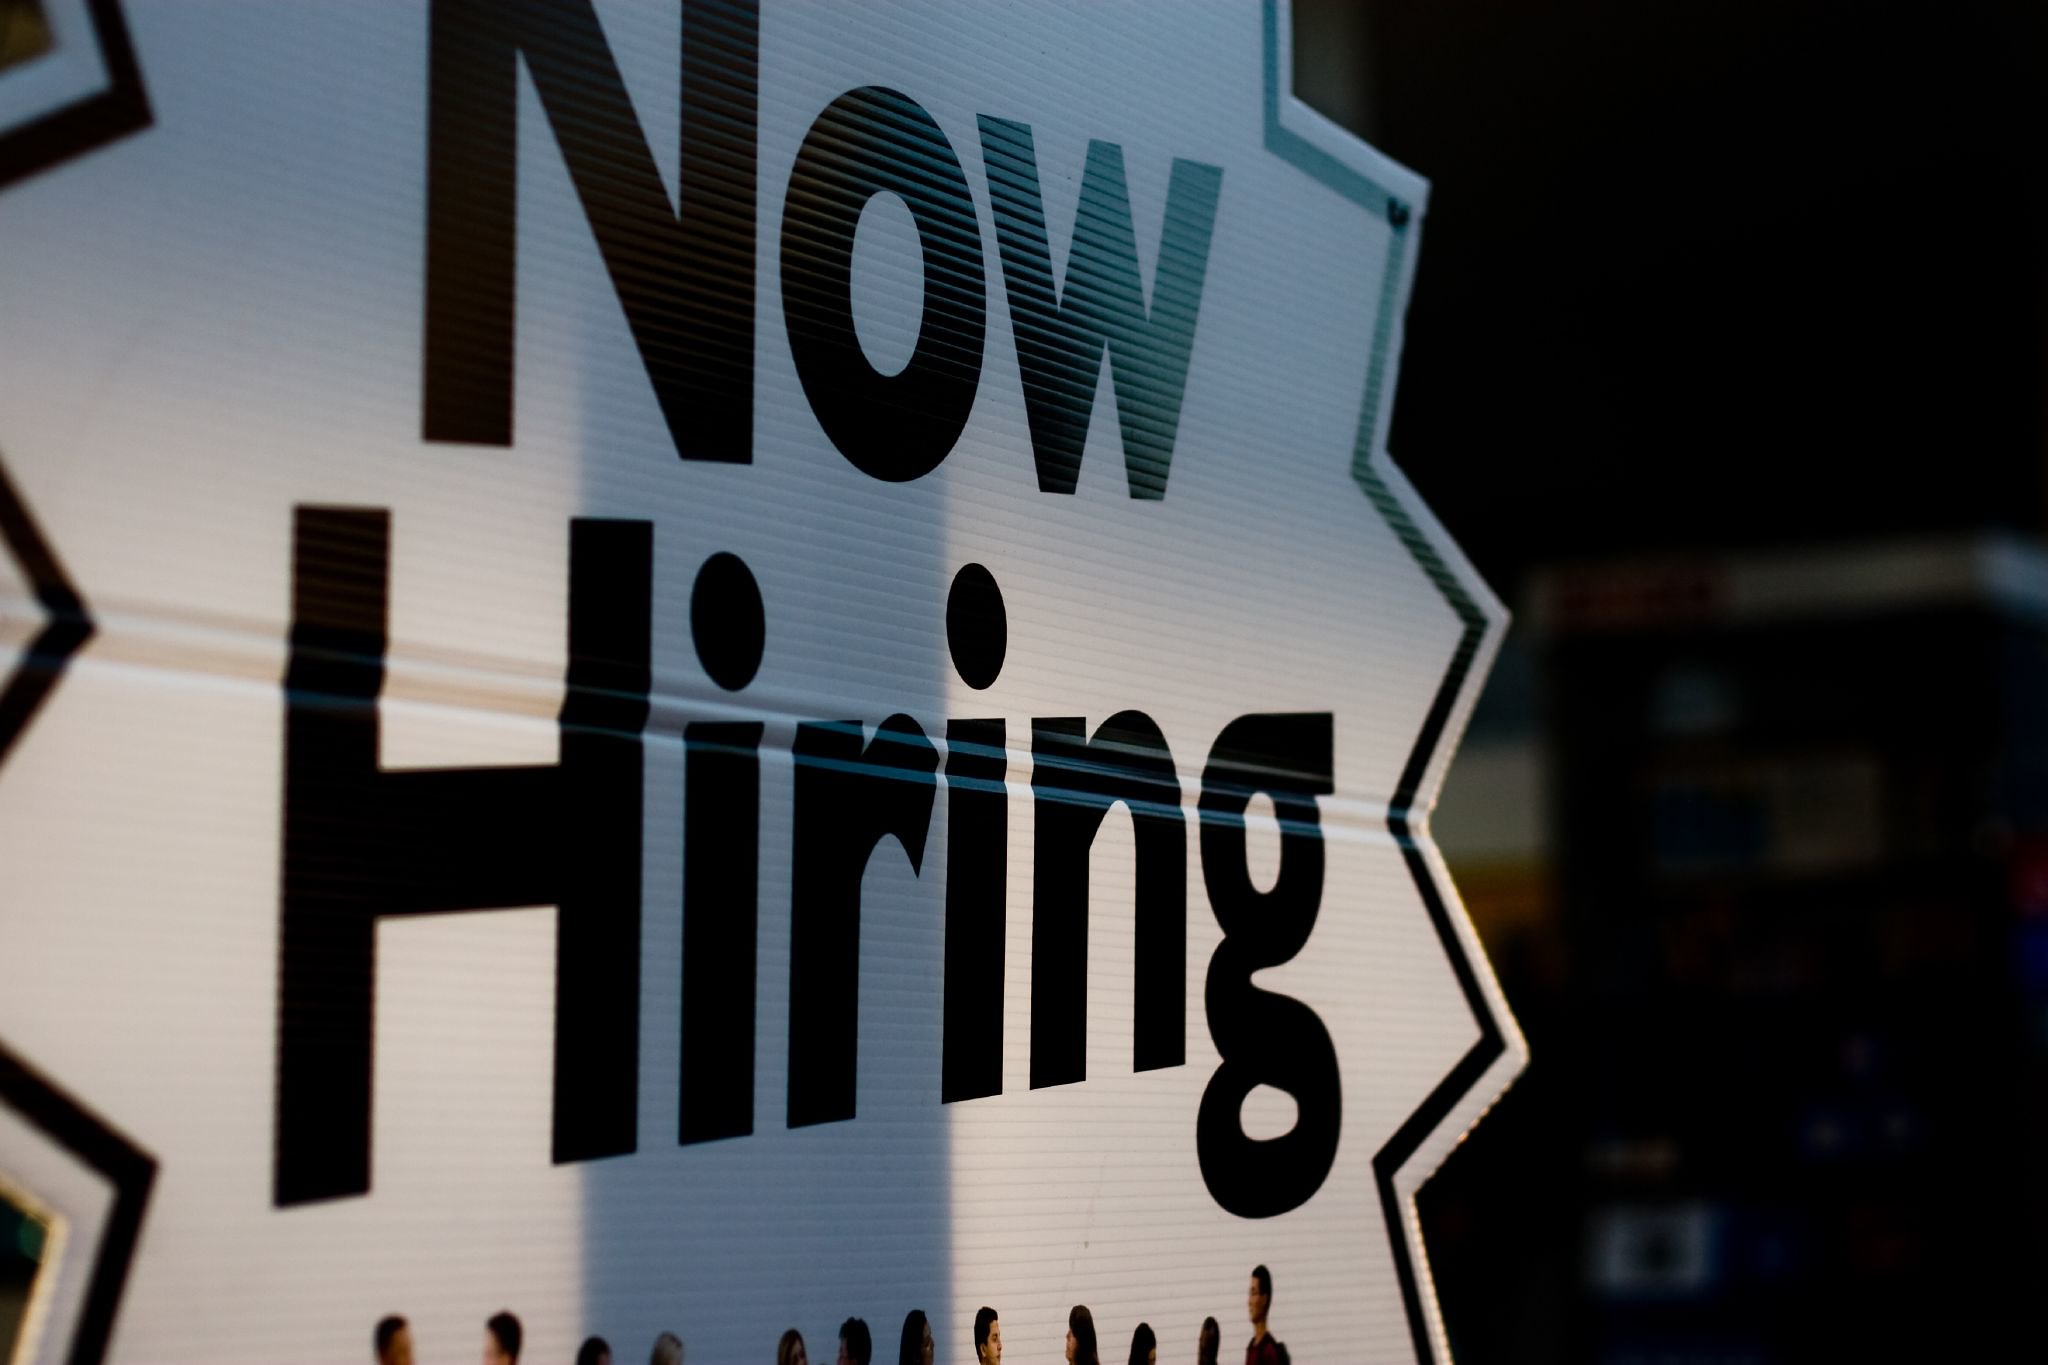 Policy Corner: For CT jobs numbers, back to normal isn’t enough